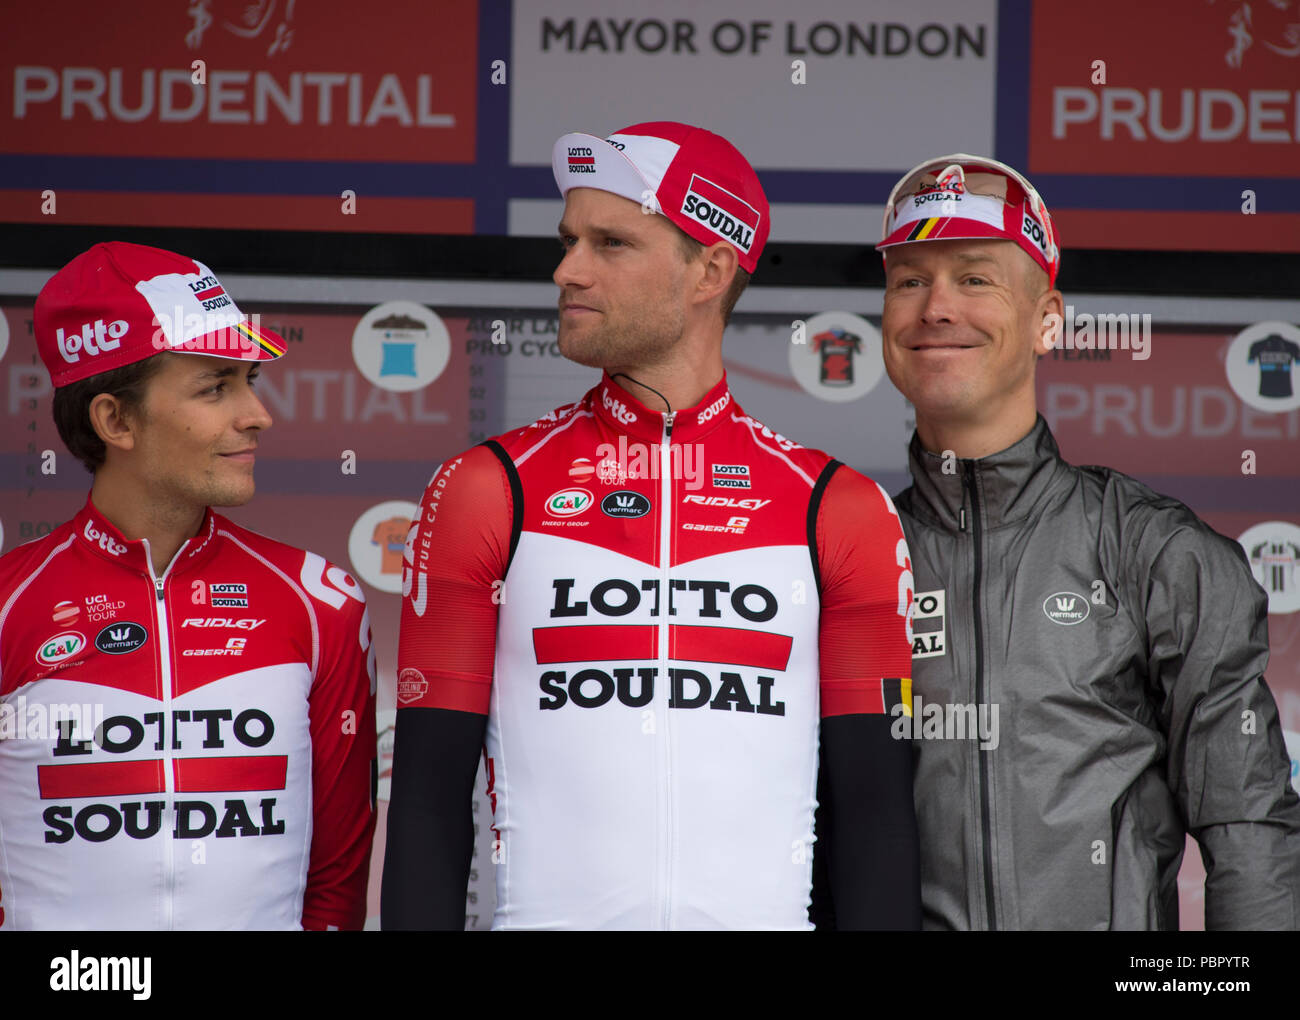 Horse Guards Parade, London, UK. 29 July, 2018. Britain’s only men’s UCI WorldTour race lines up for race start in central London with the riders and teams presented to spectators. Photo: Lotto Soudal Team. Credit: Malcolm Park/Alamy Live News. Stock Photo